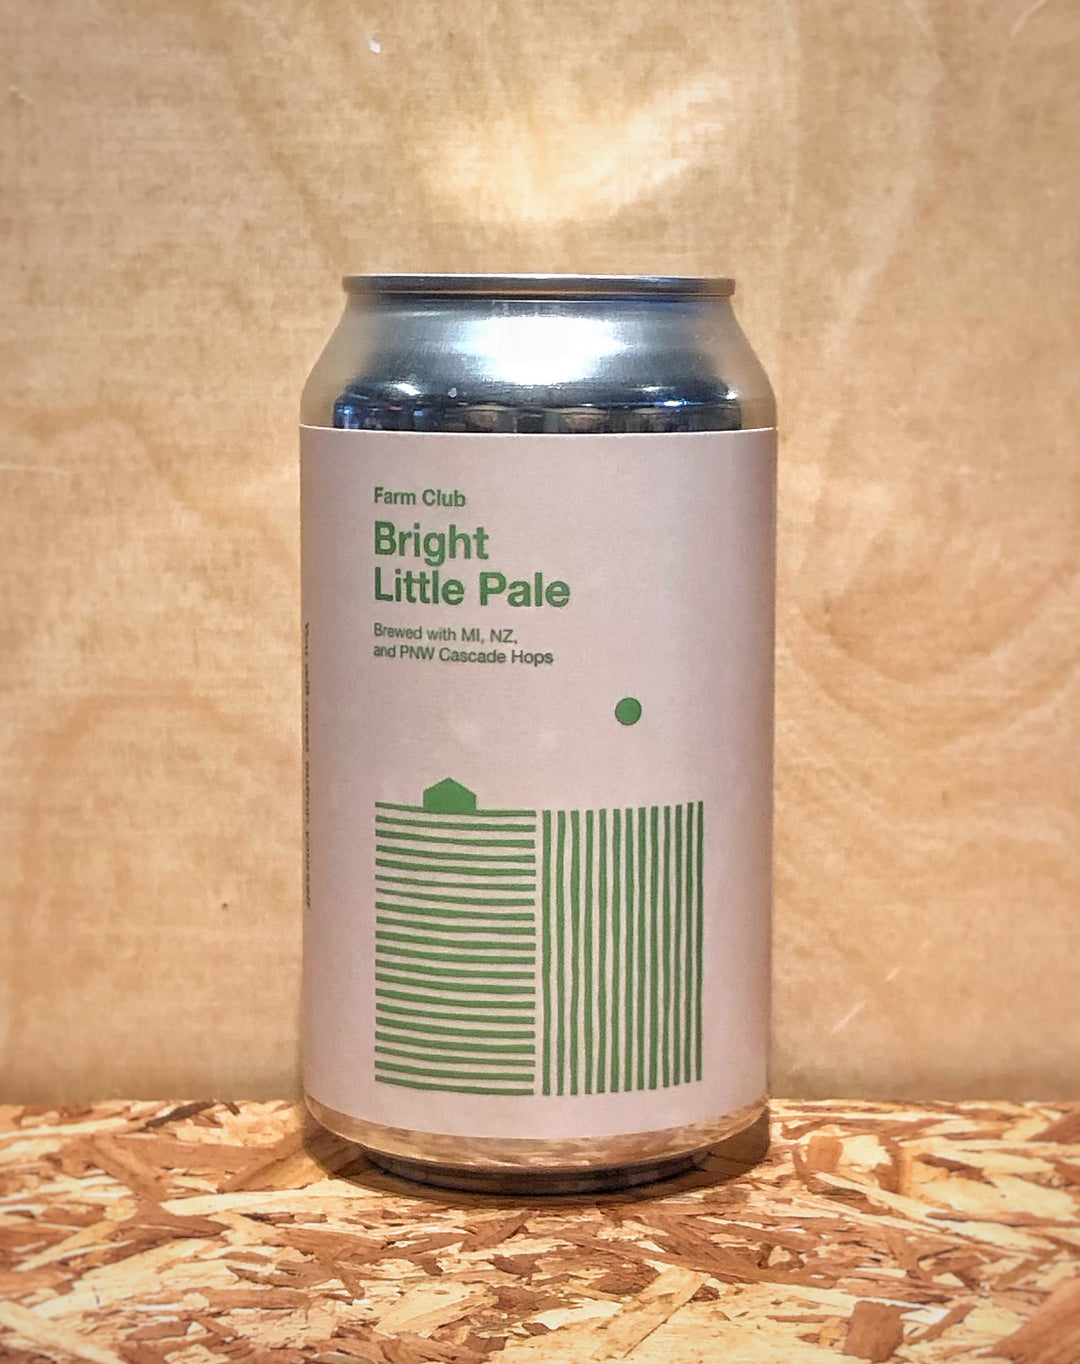 Farm Club 'Bright Little Pale Ale' Pale Ale brewed with Nelson Sauvin and Motueka Hops (Traverse City, Michigan)